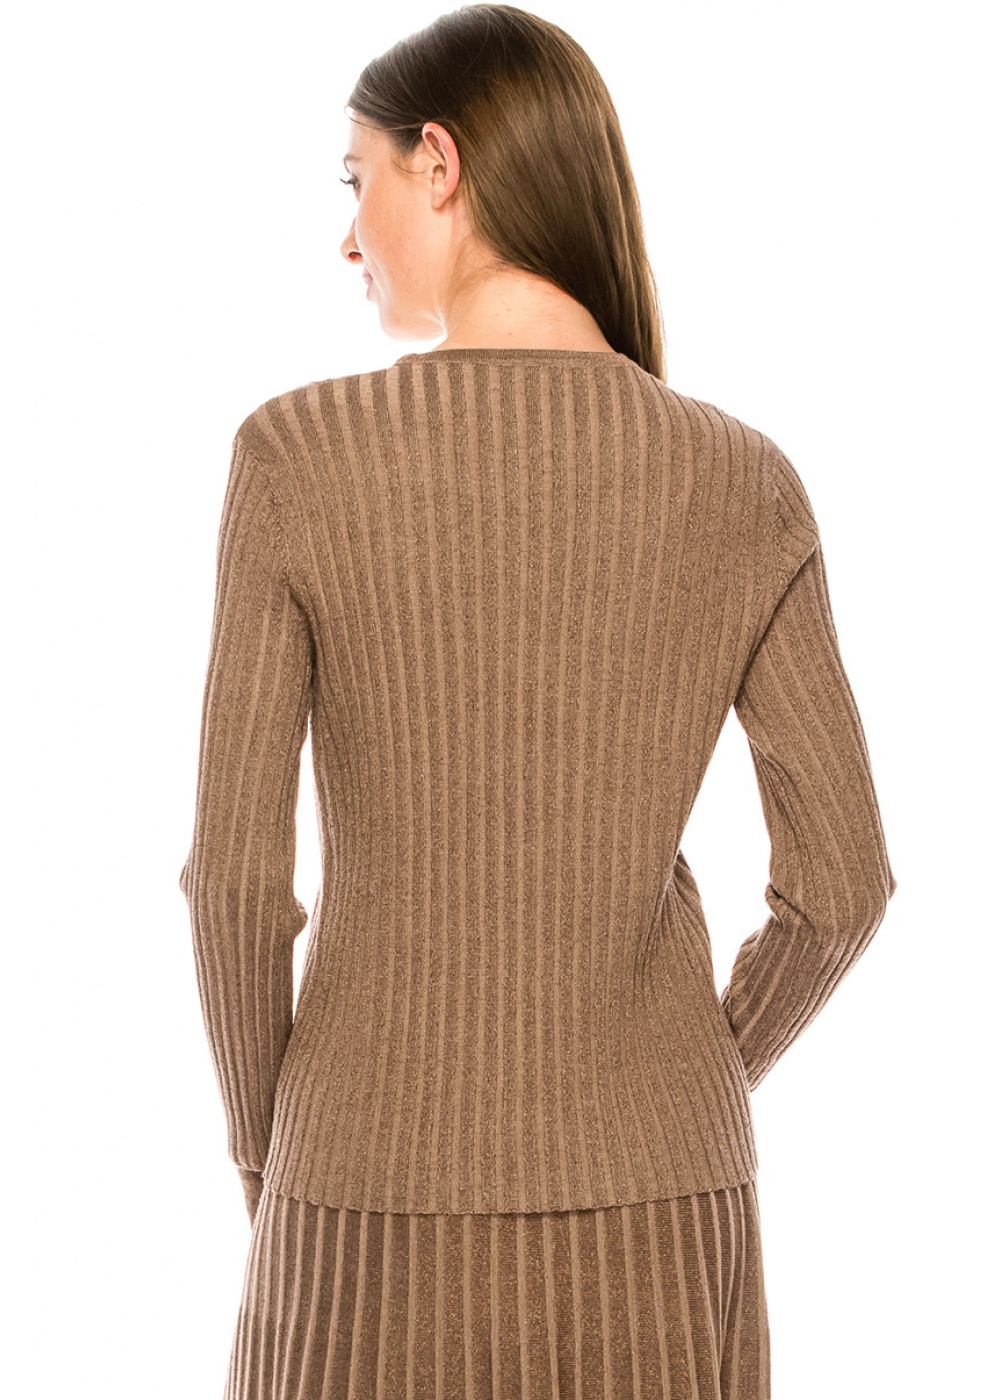 Crew neck taupe sweater with lurex threads